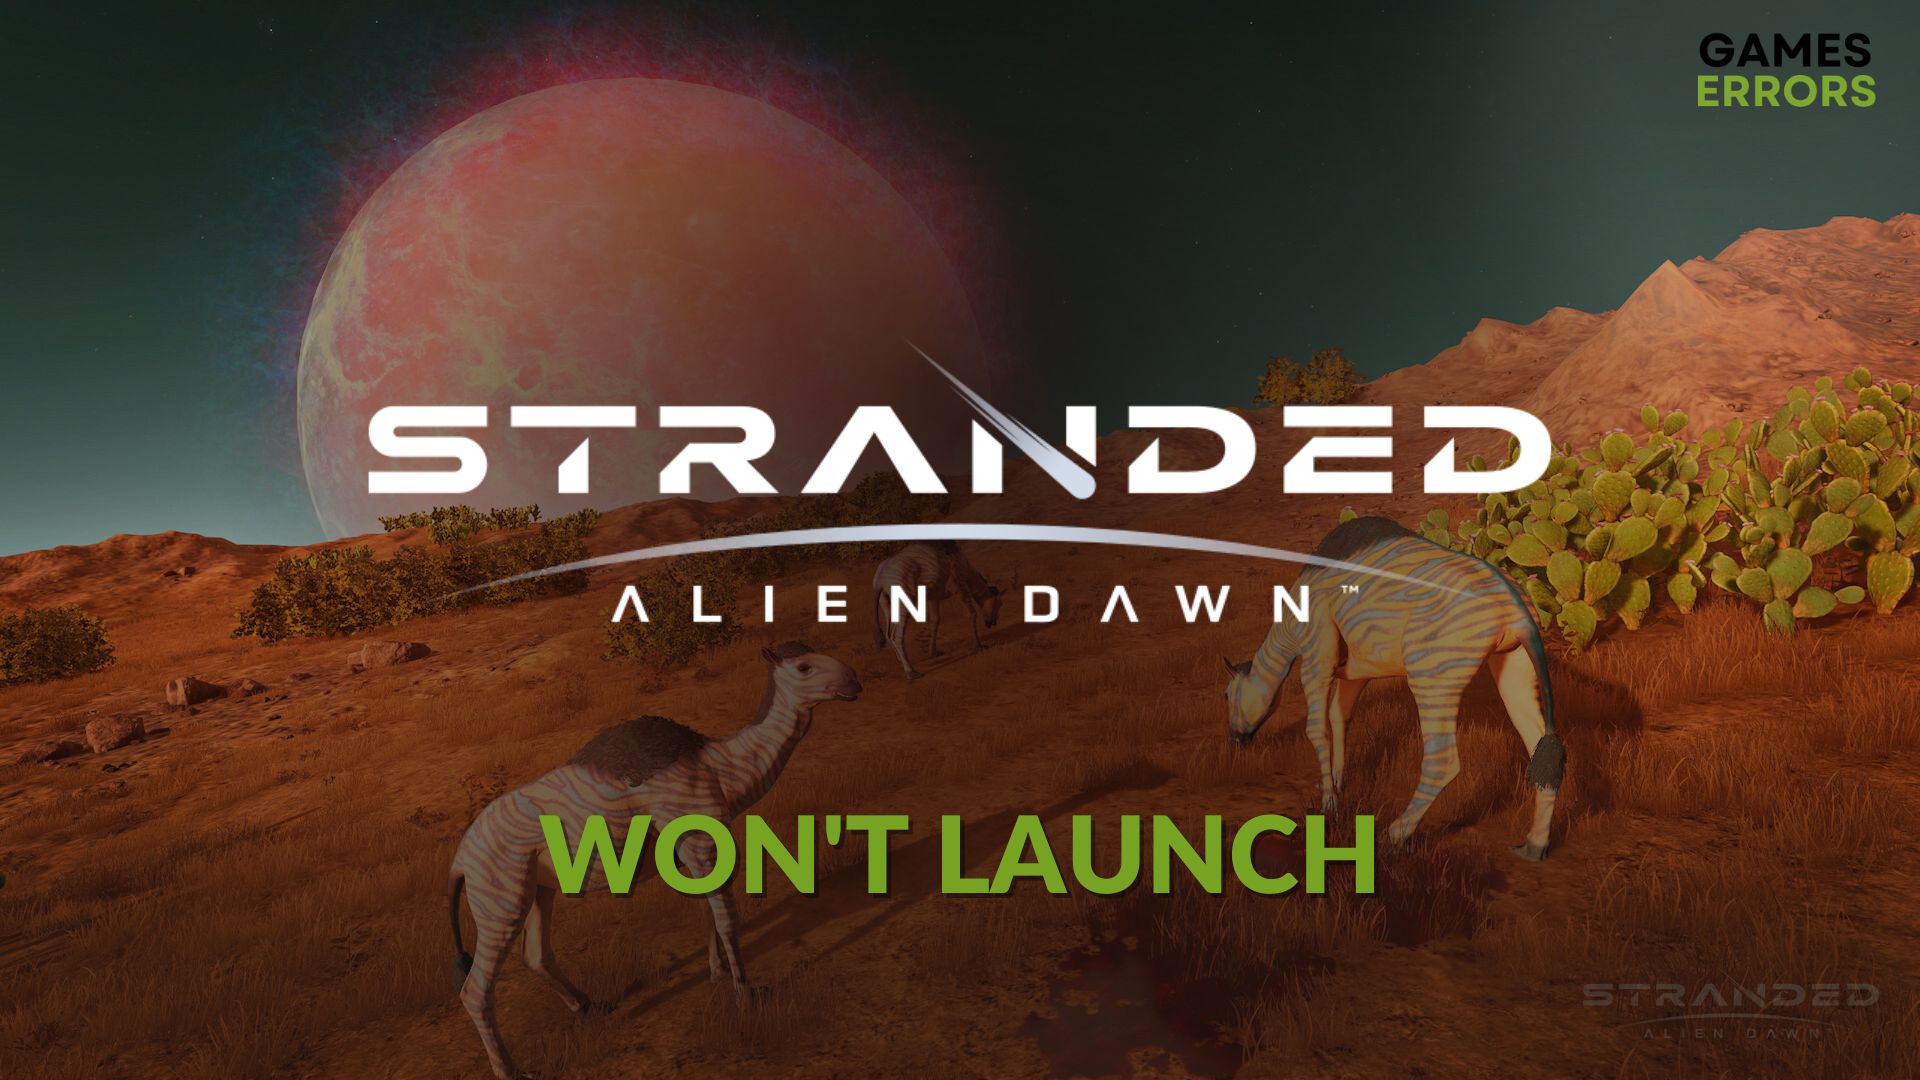 Stranded: Alien Dawn. Game found to launch